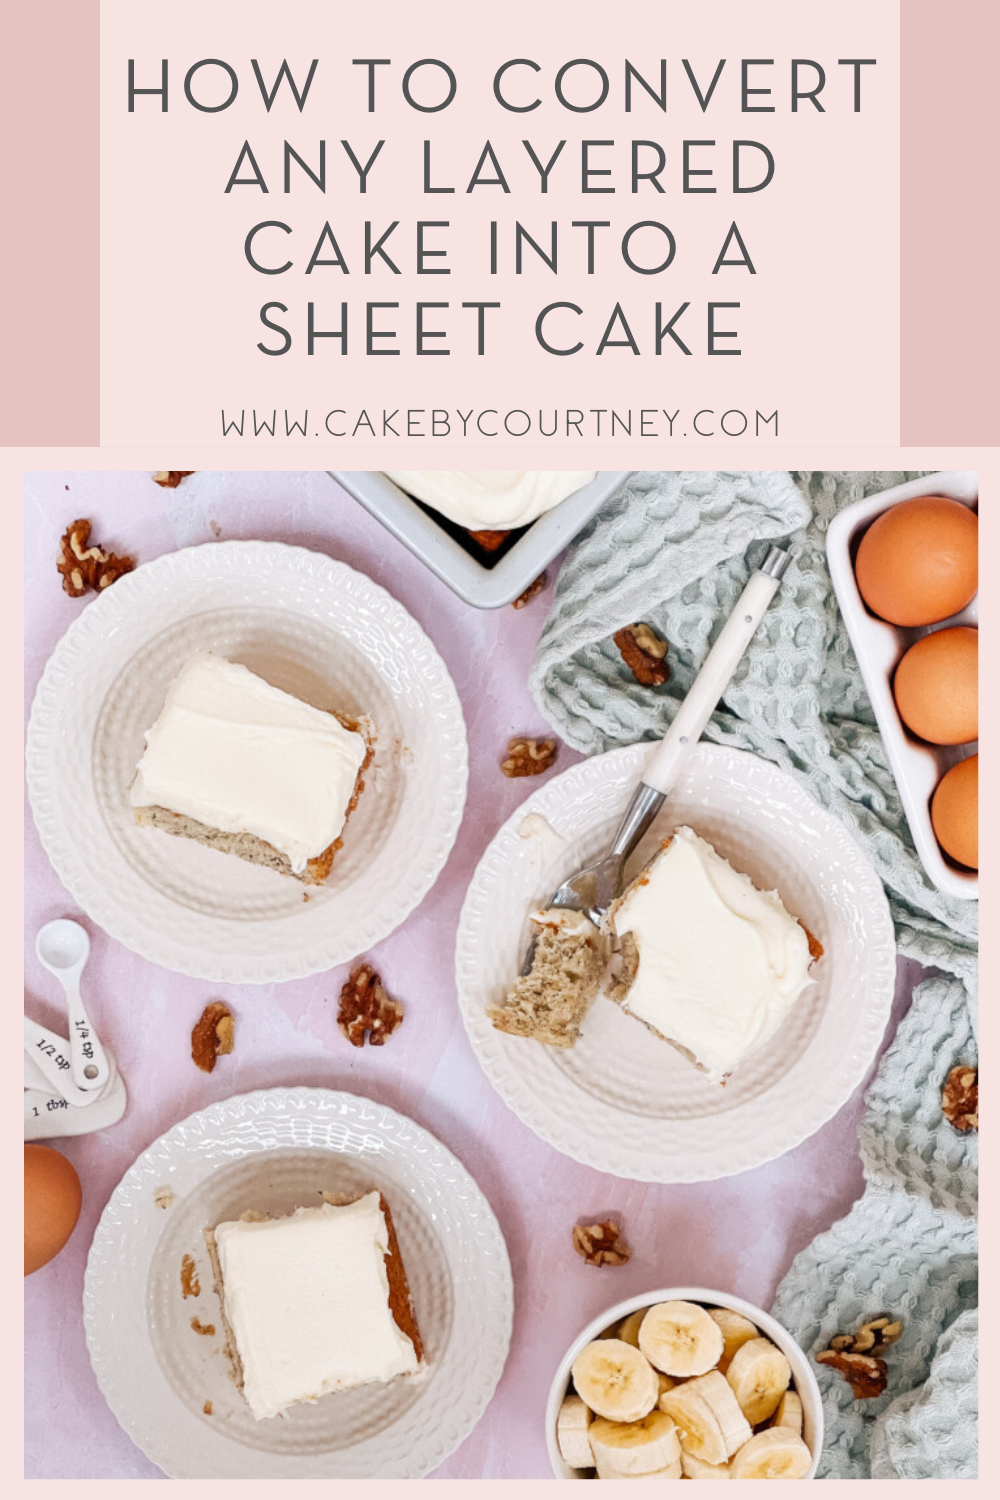 tips for converting layered cake into sheet cake. www.cakebycourtney.com